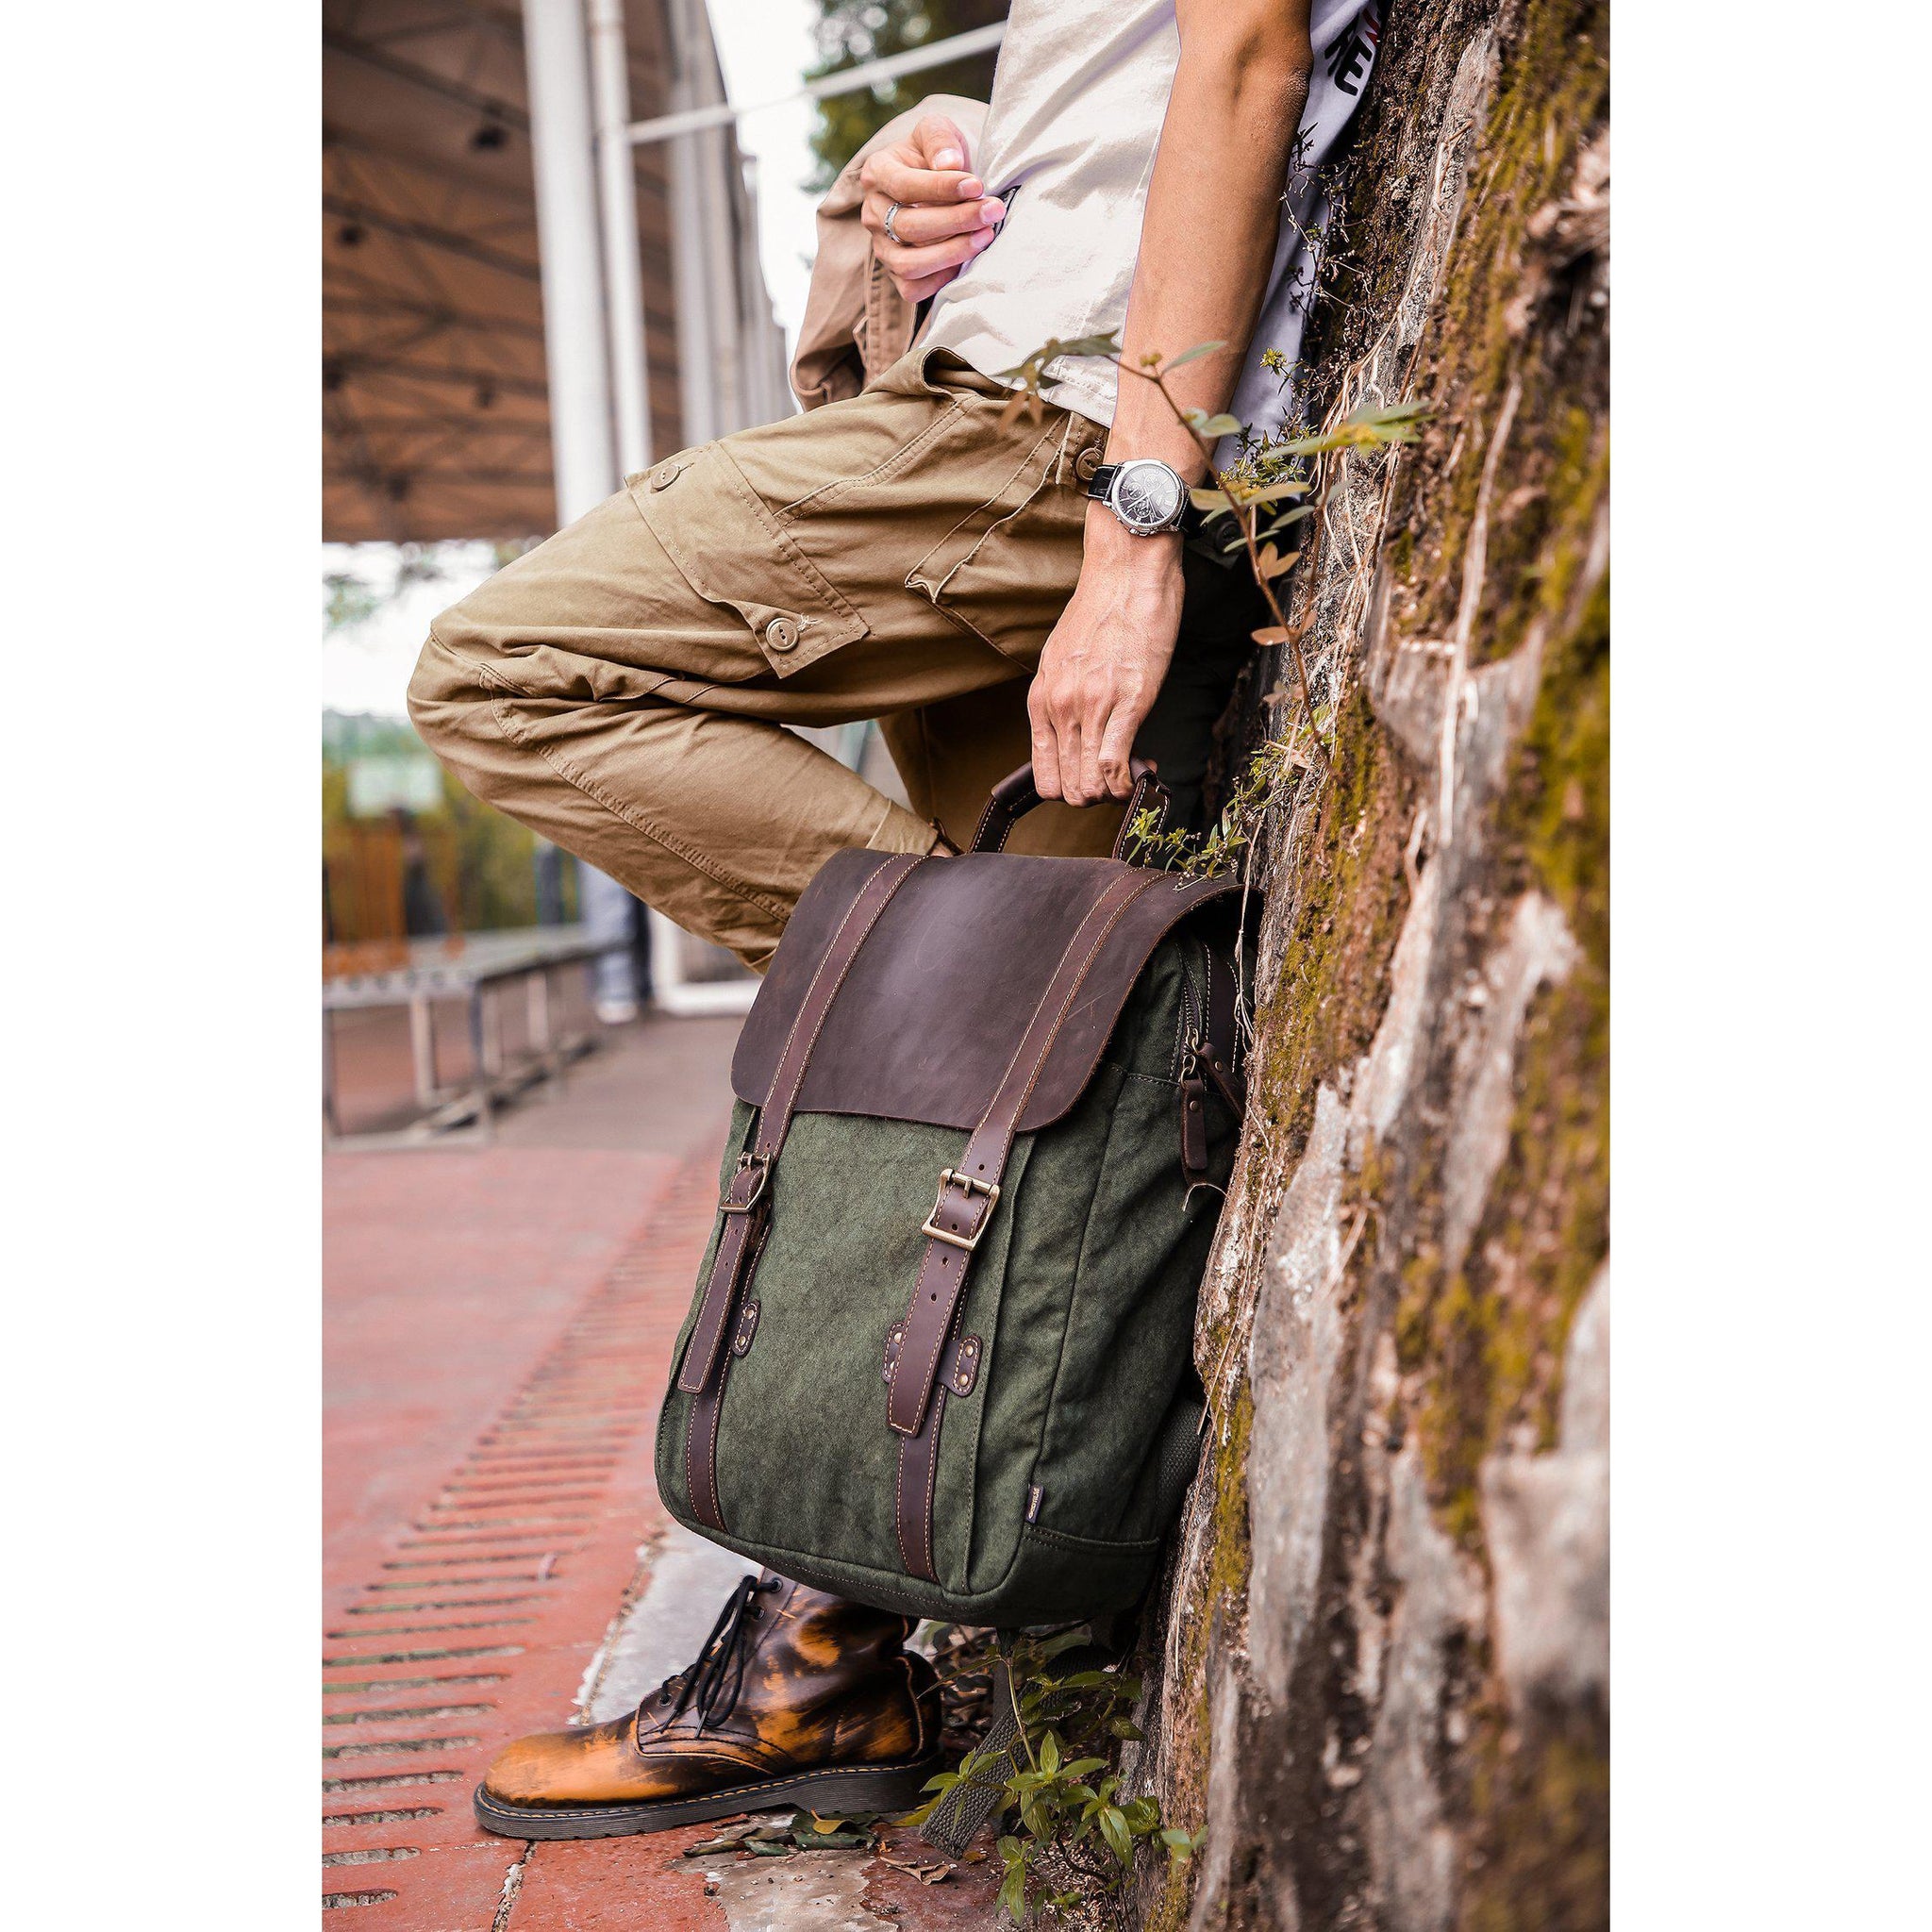 Canvas Backpack - Unisex Bags & Accessories